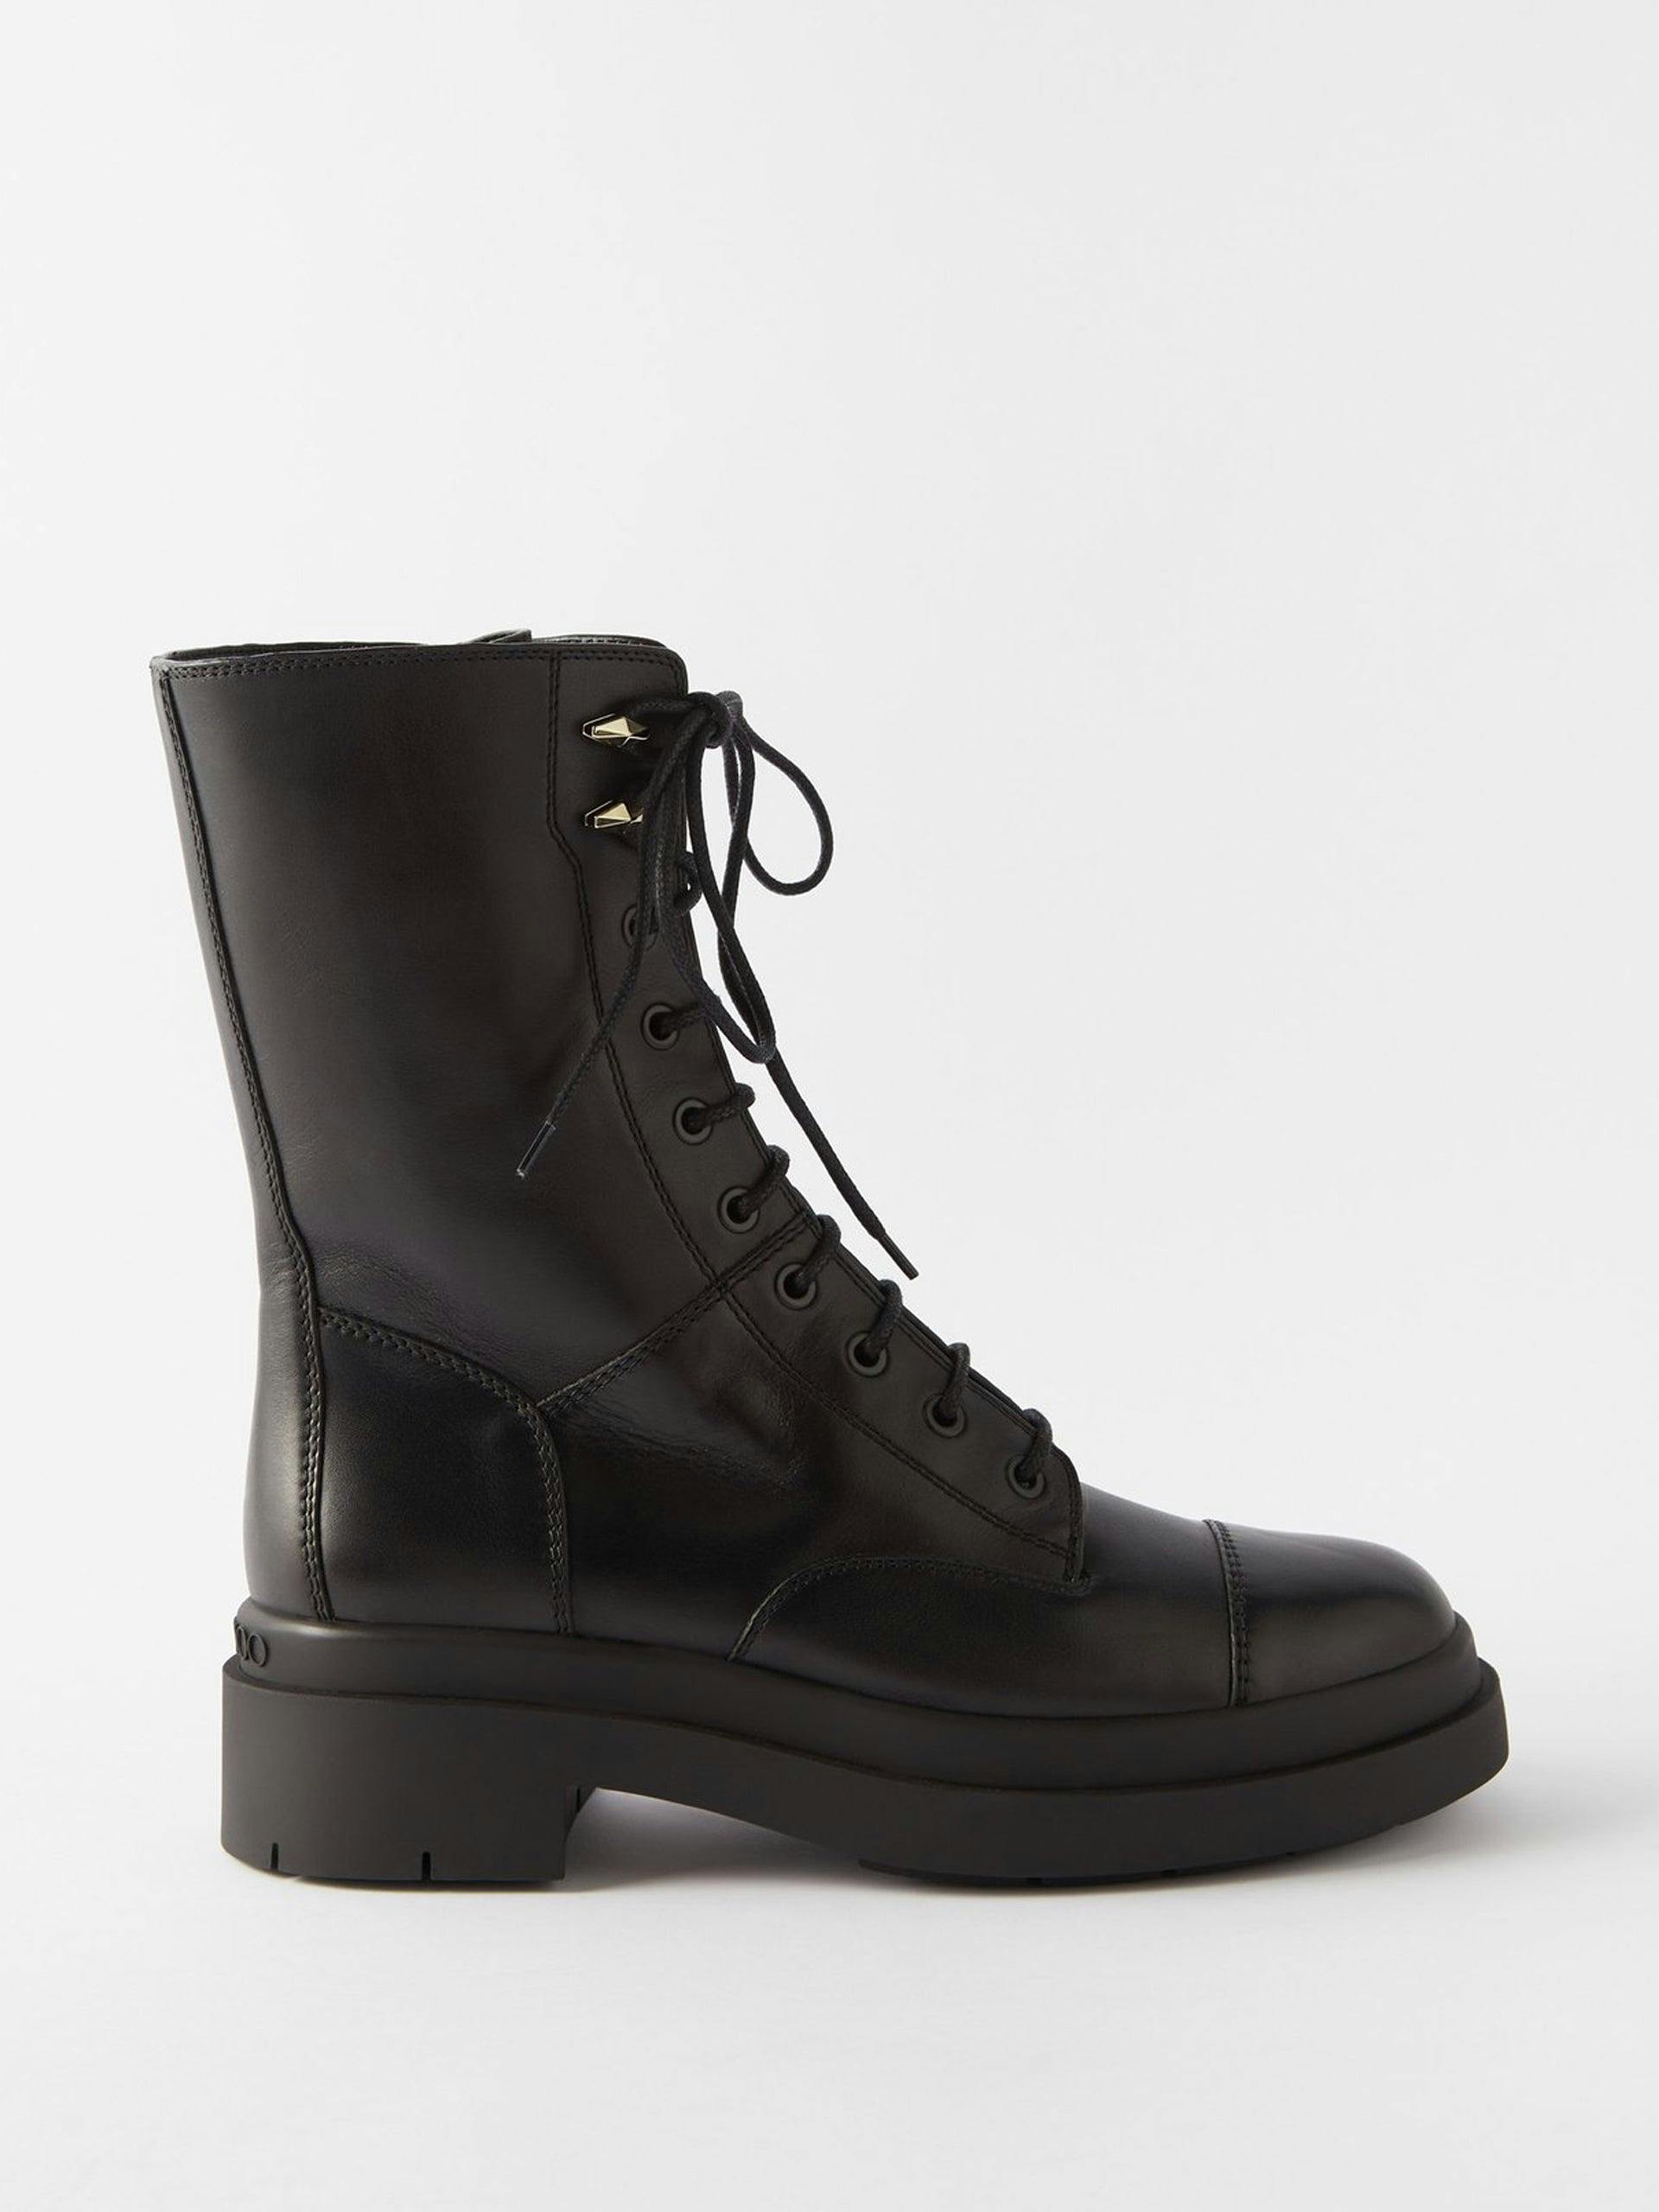 Nari lace-up leather boots